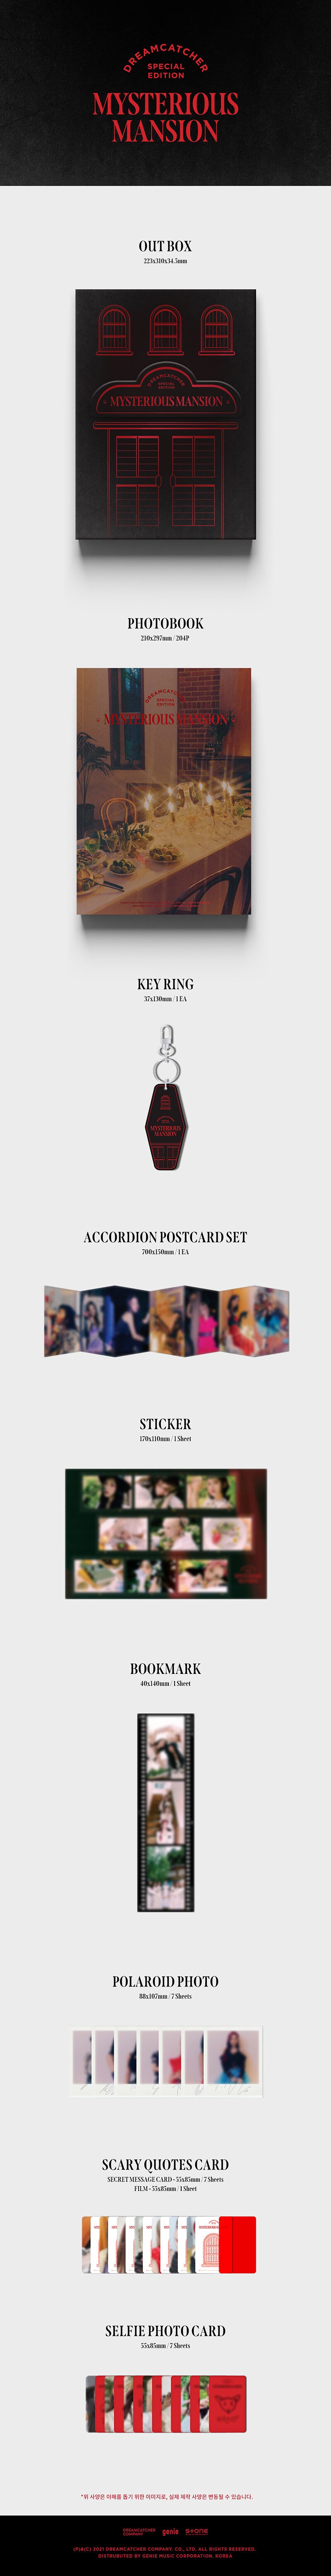 DREAM CATCHER SPECIAL EDITION 'MYSTERIOUS MANSION' + POSTER DETAIL